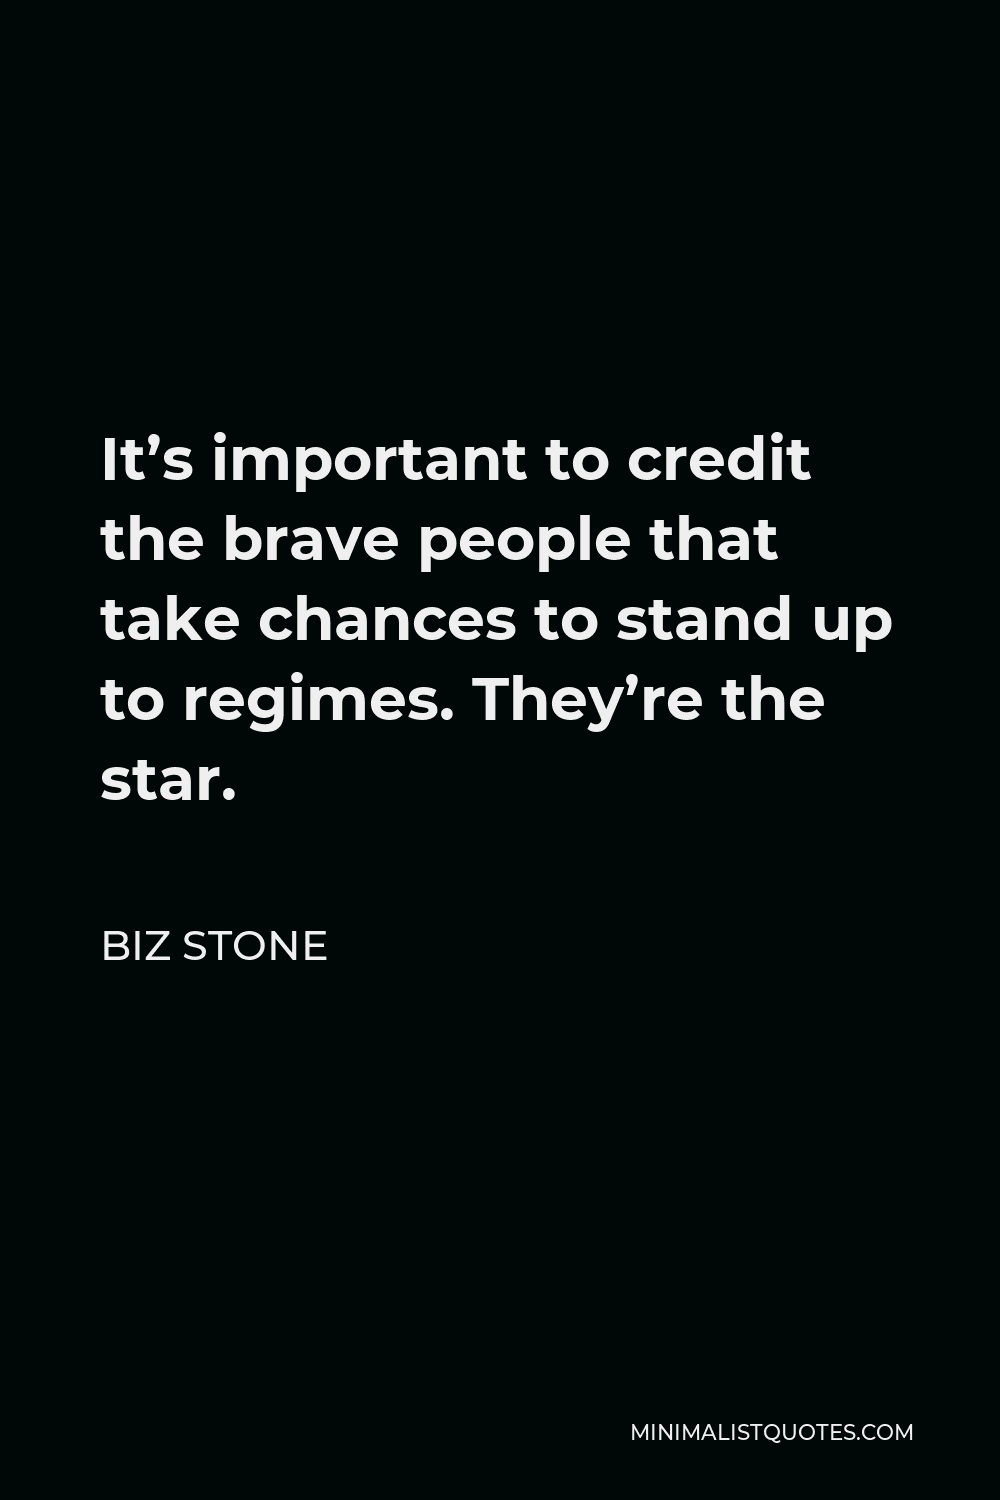 Biz Stone Quote - It’s important to credit the brave people that take chances to stand up to regimes. They’re the star.